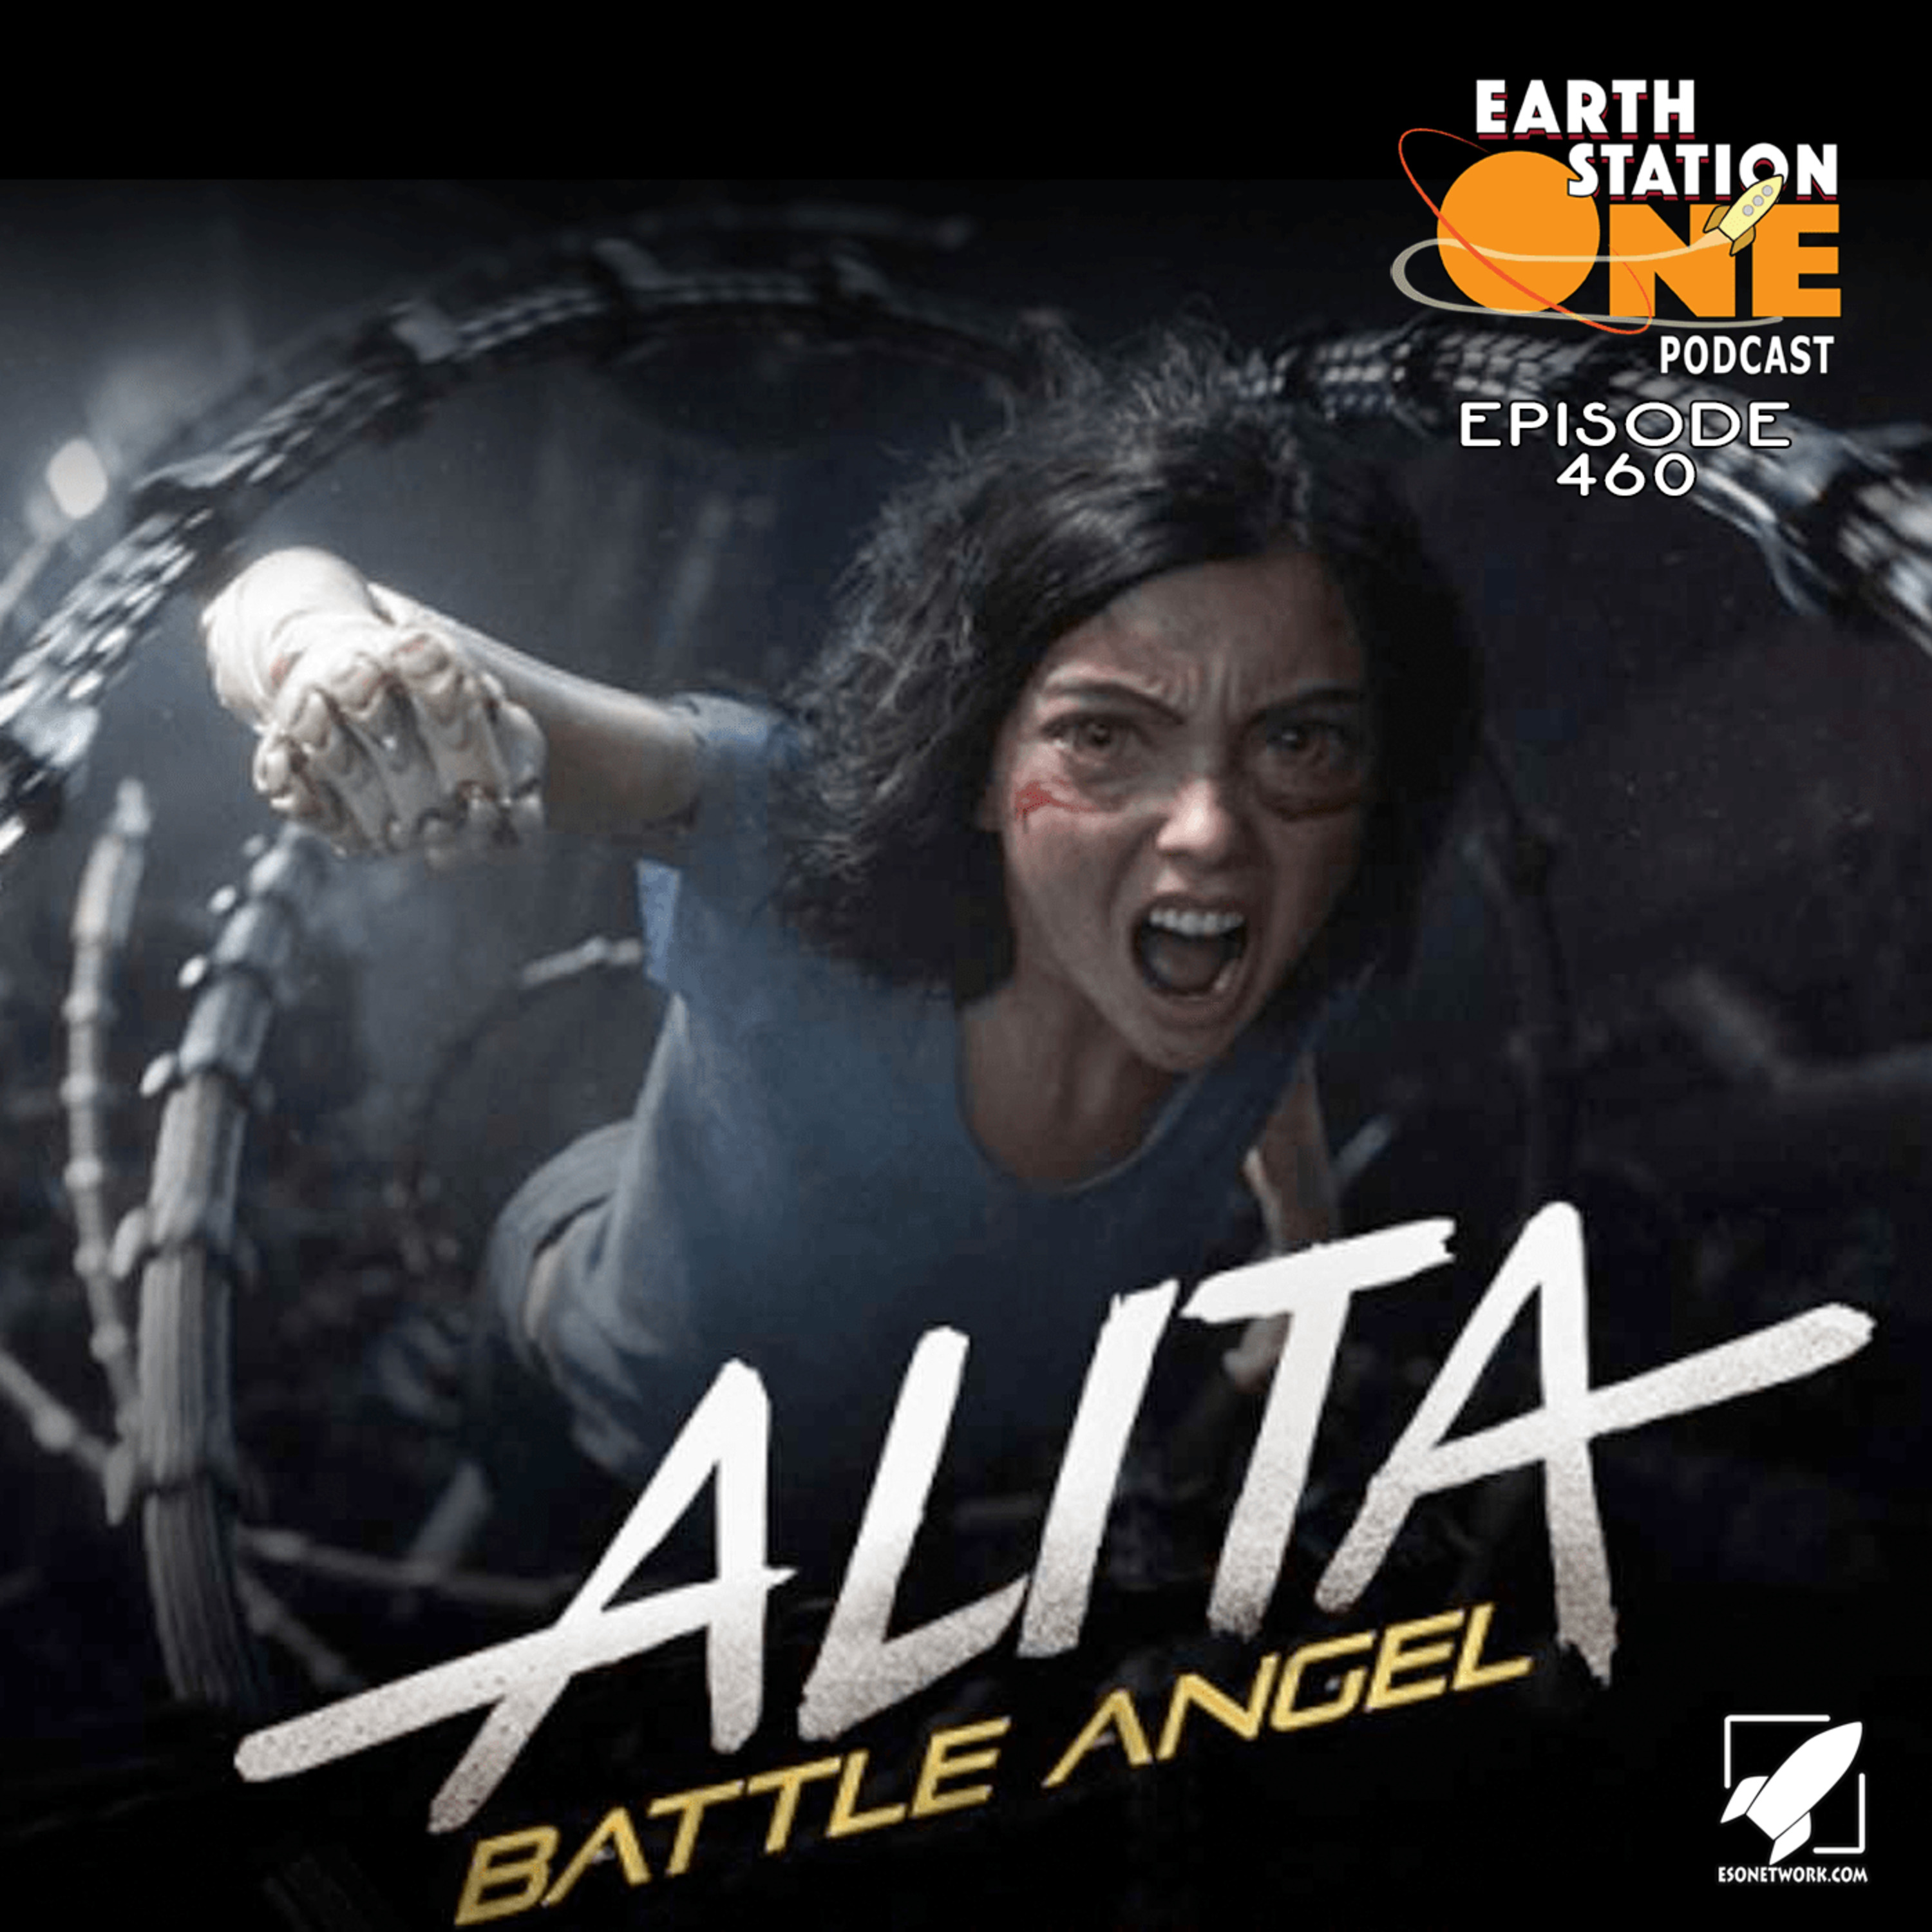 The Earth Station One Podcast Episode 460 - Alita: Battle Angle Movie Review